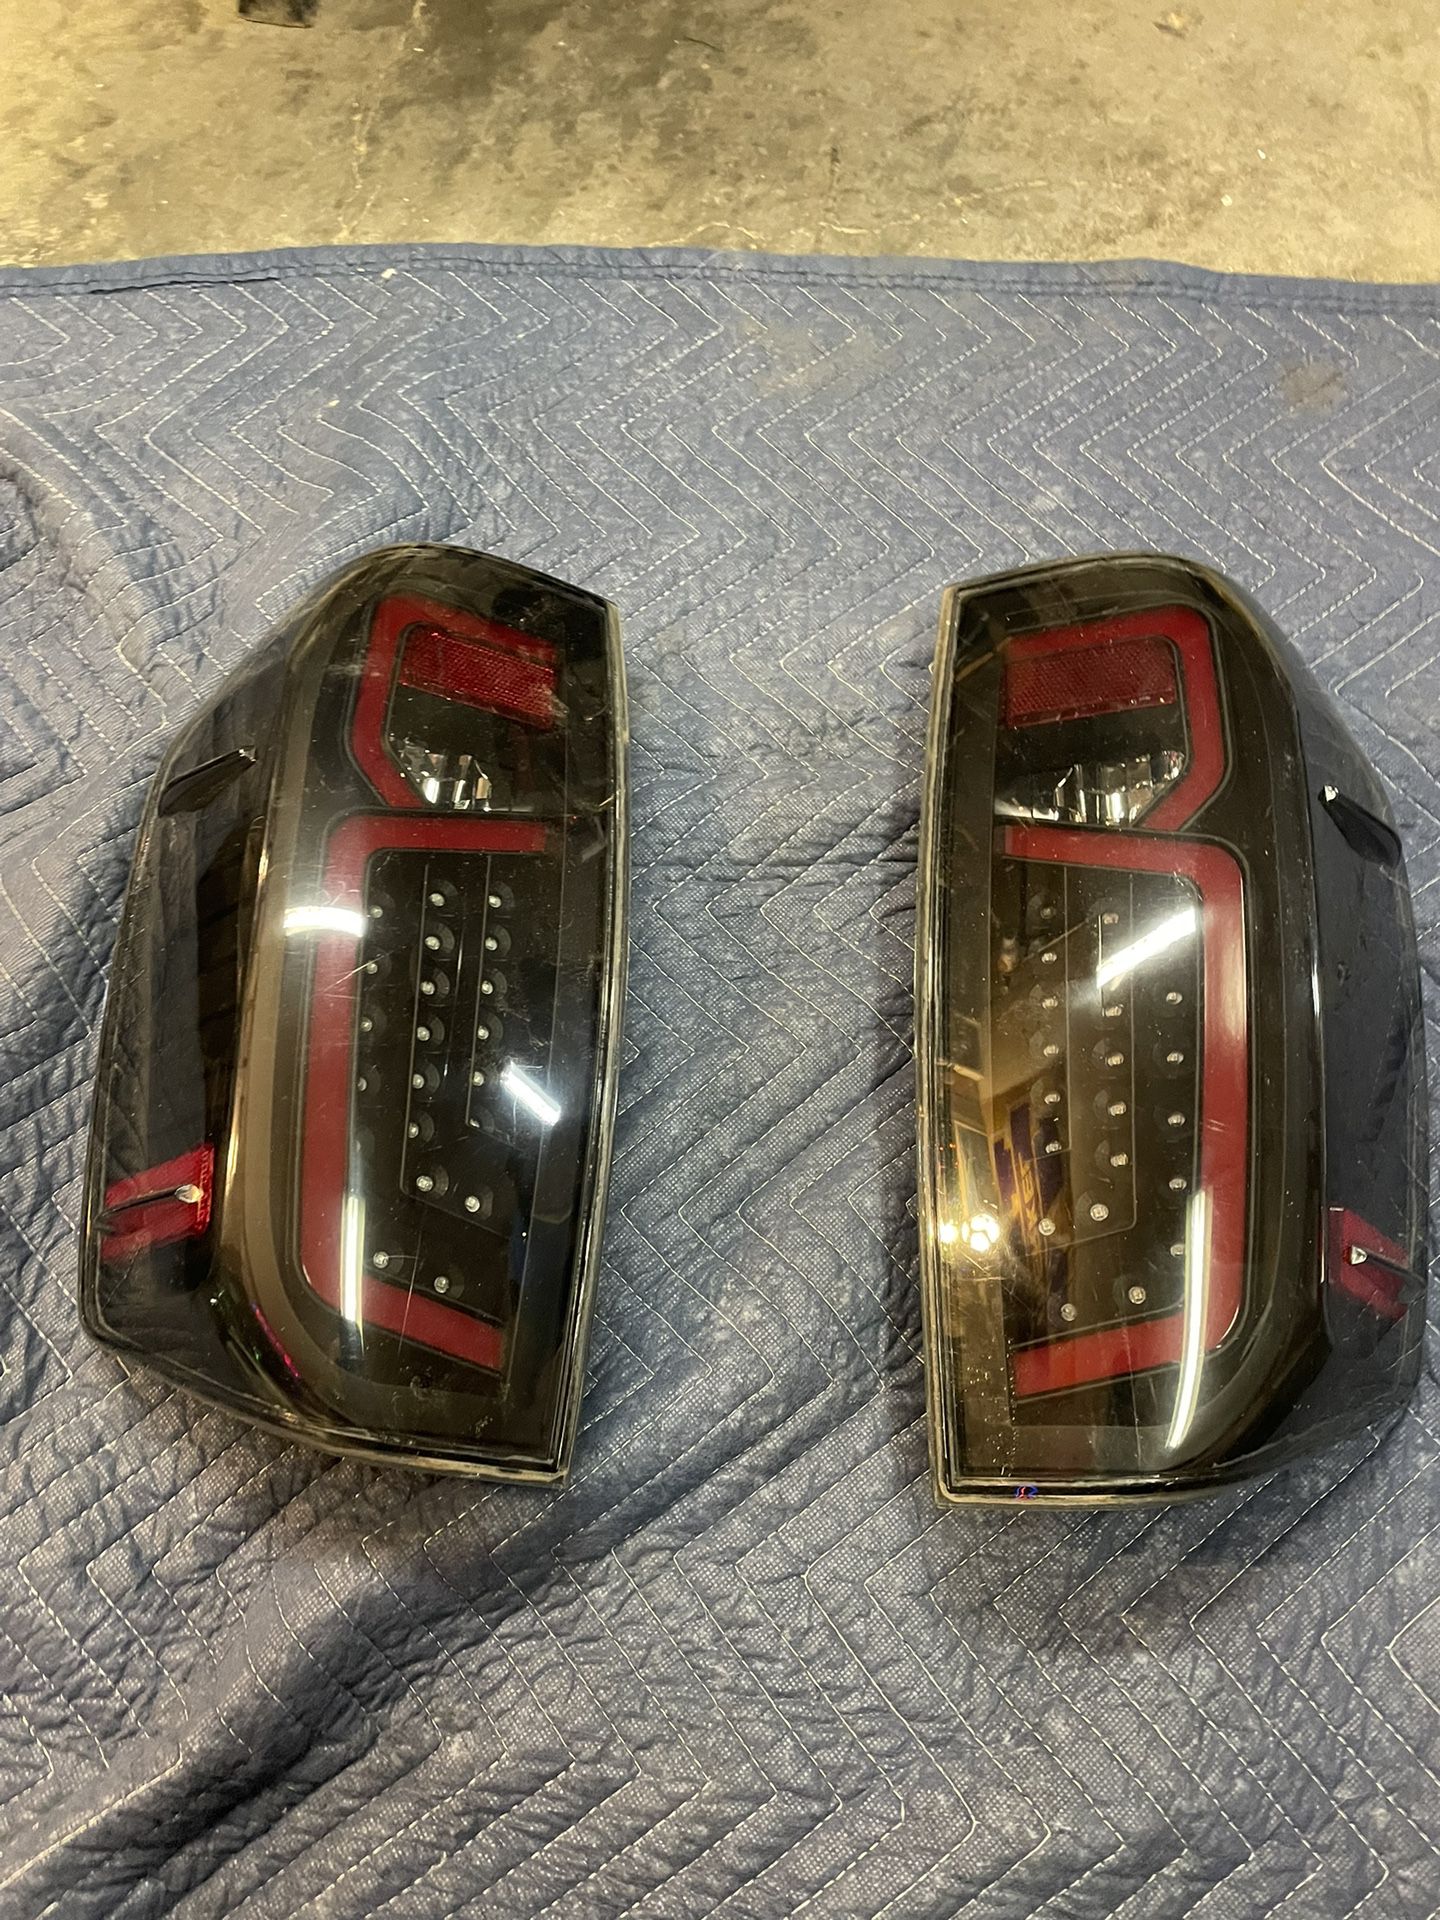 2021 Toyota Tundra Smoked Out Led Tail Lights